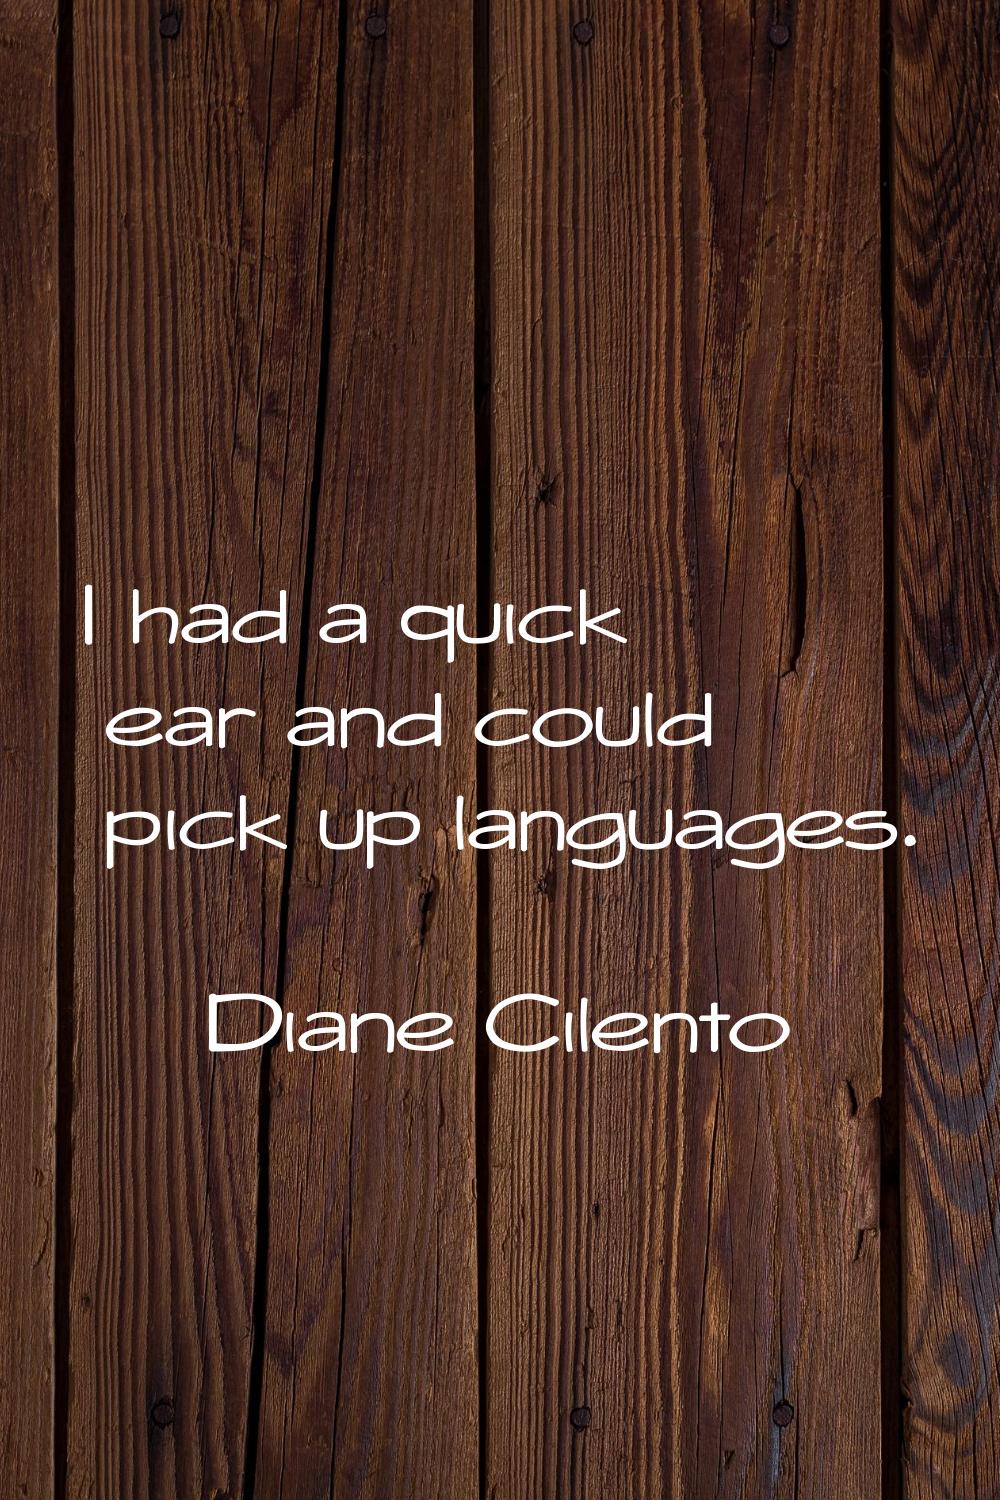 I had a quick ear and could pick up languages.